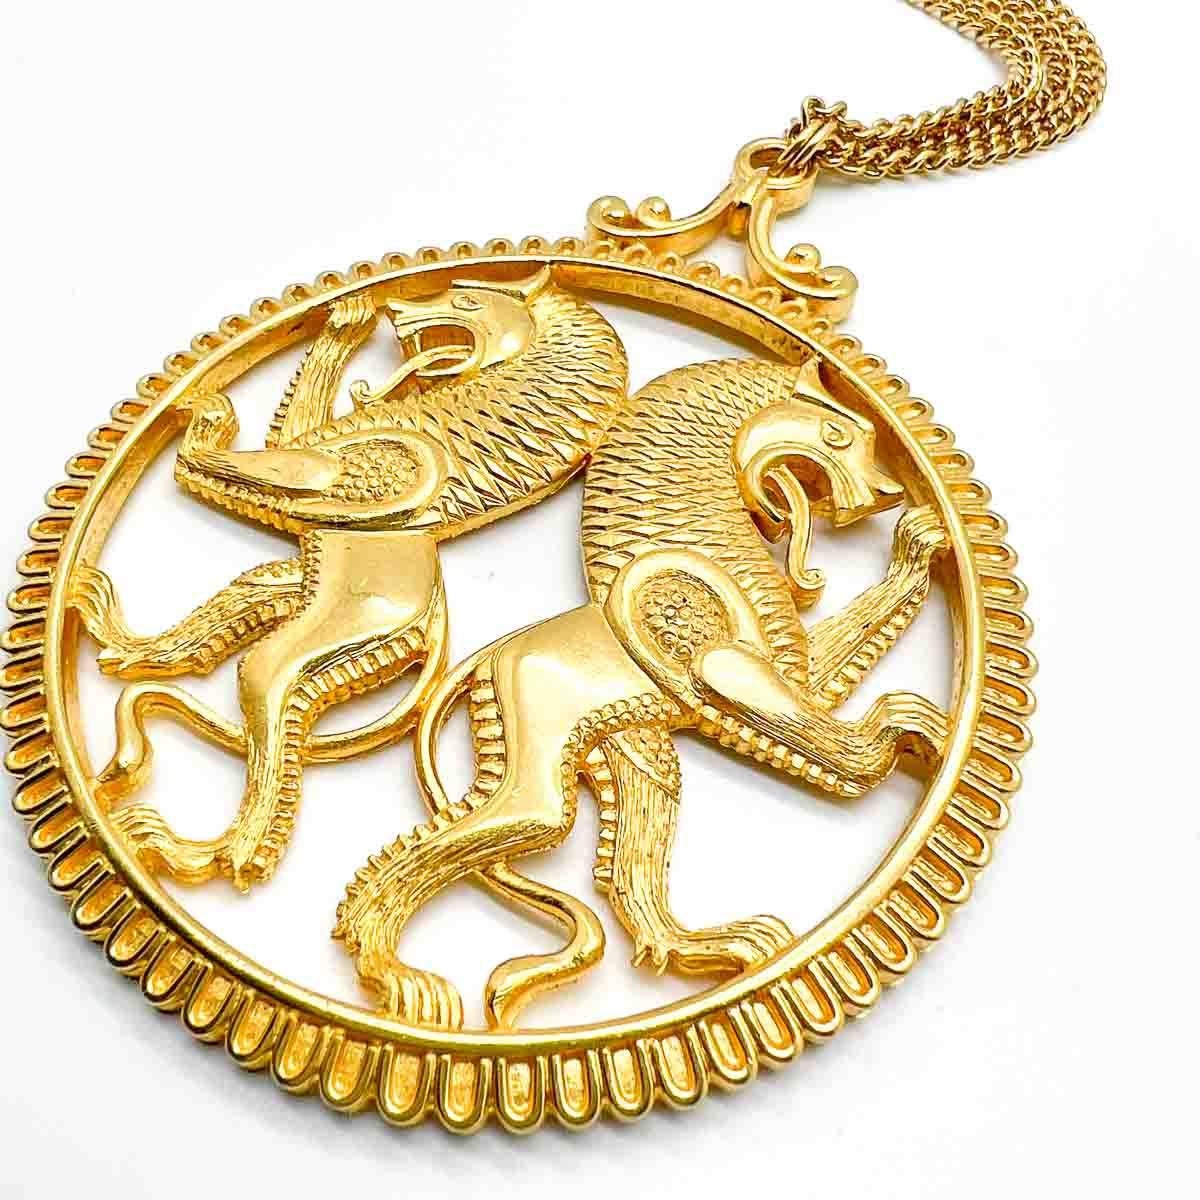 Vintage Statement Rampant Lions Medallion Necklace 1960s In Good Condition For Sale In Wilmslow, GB